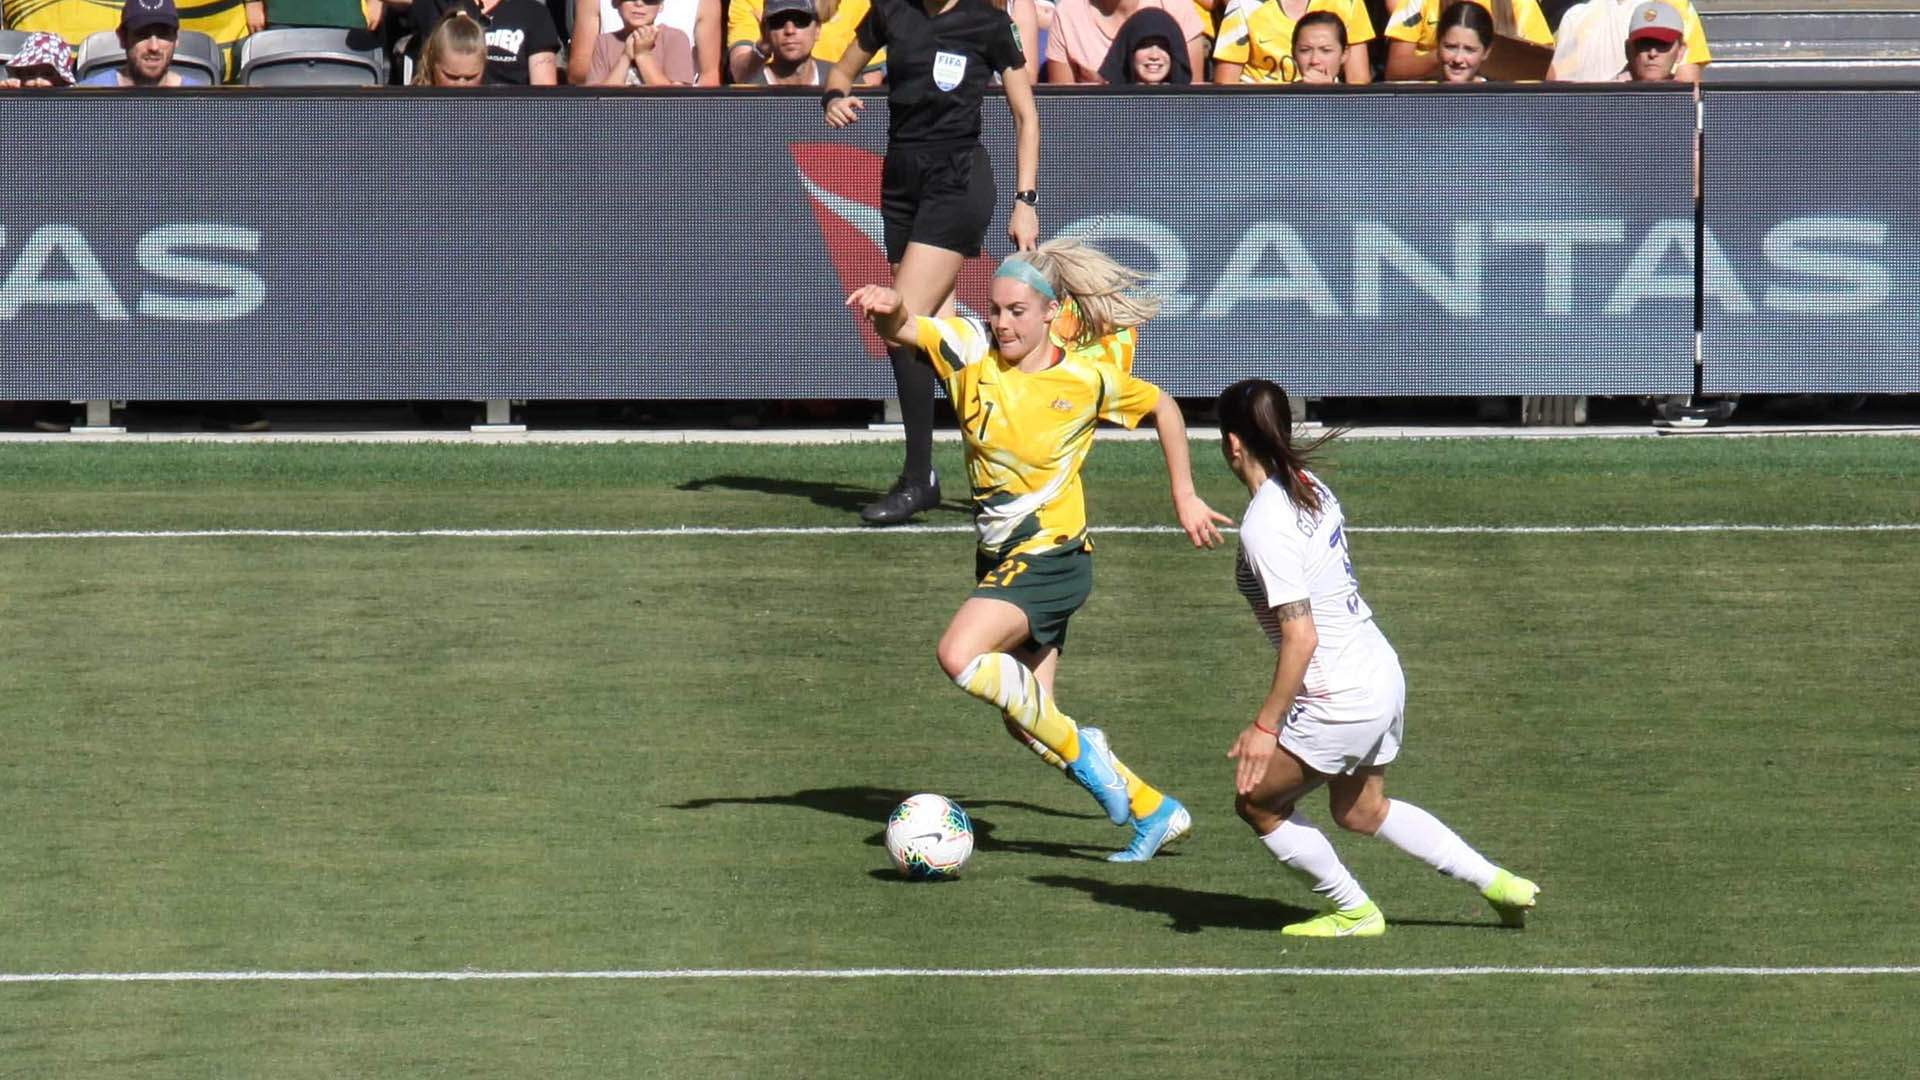 Riverstage Has Just Been Added as a Live Screening Site for the Matildas' World Cup Semi-Final